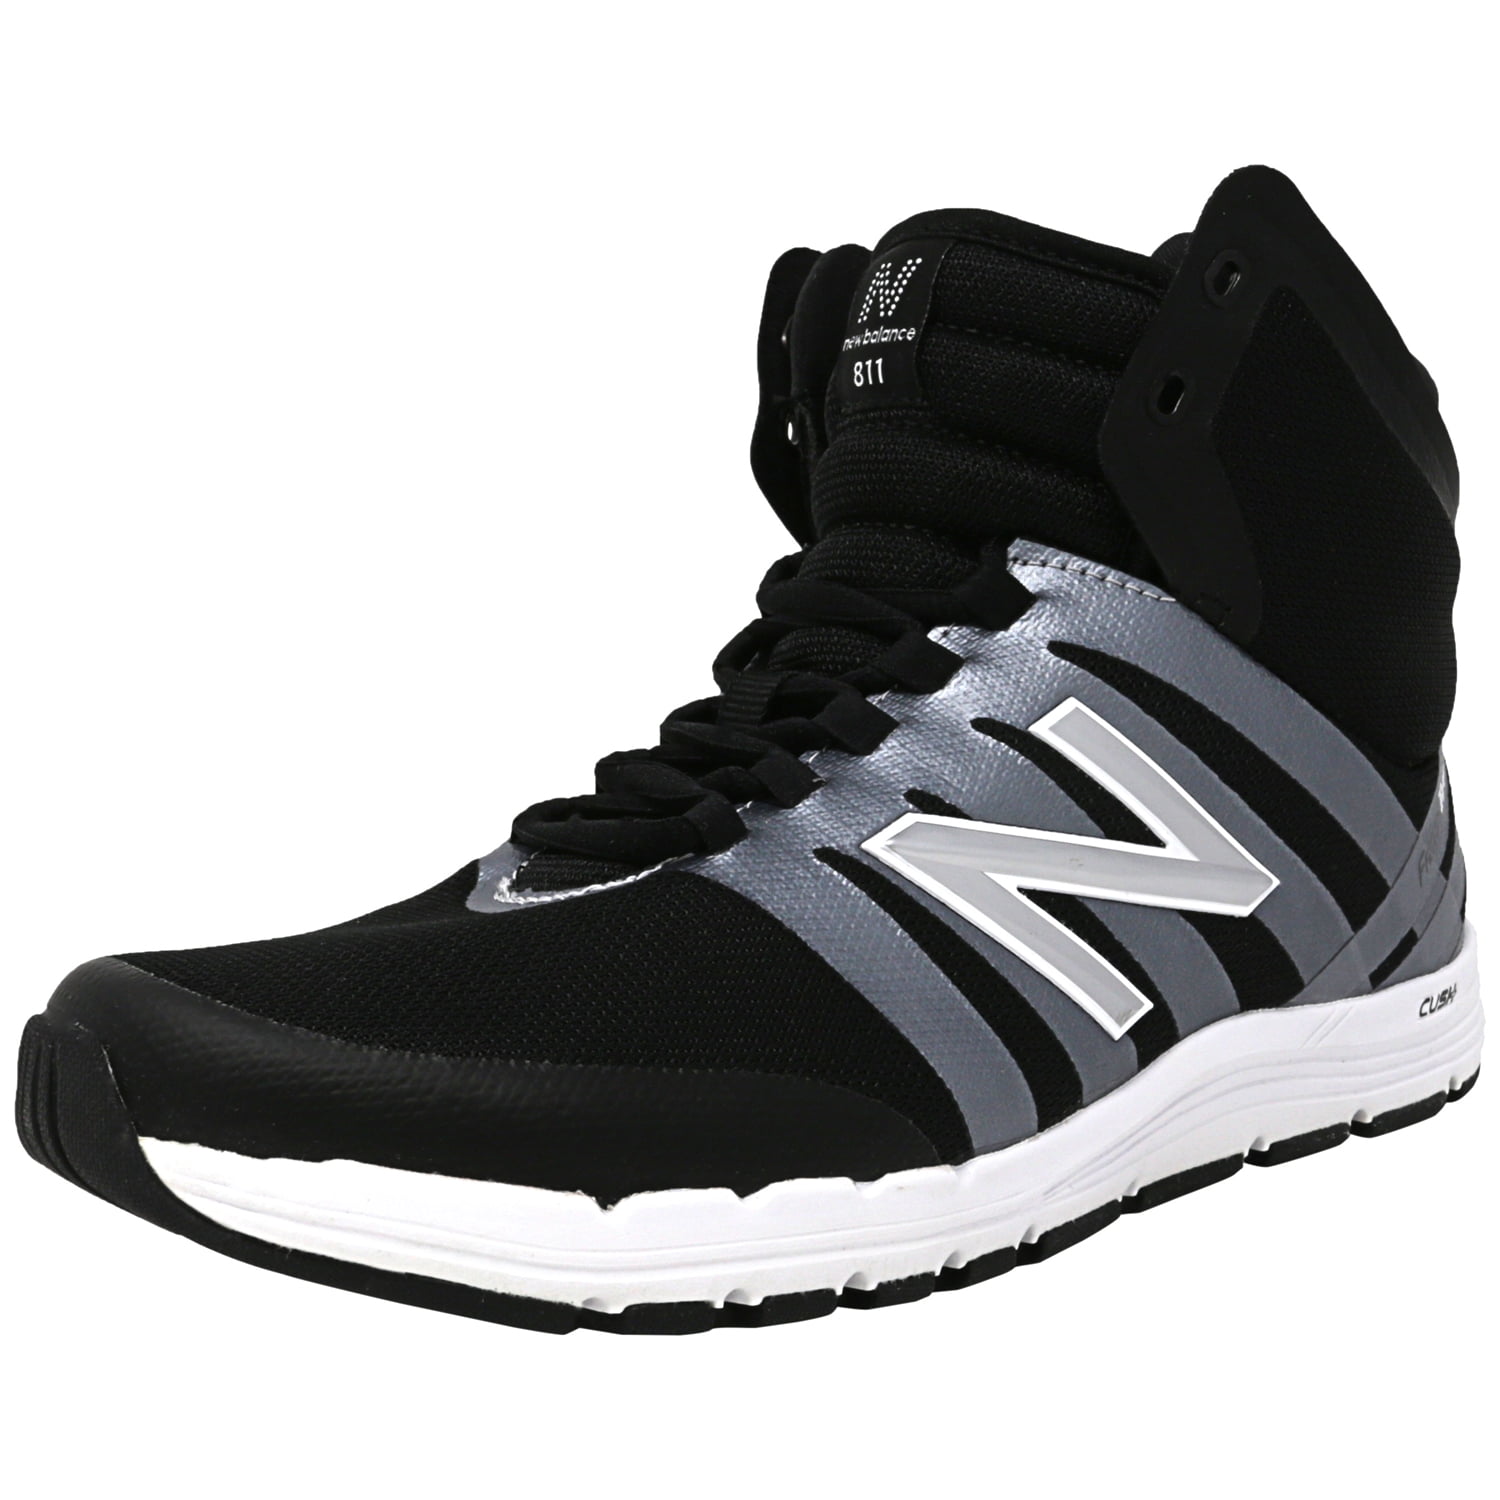 Wx811 Mbw Ankle-High Running Shoe - 9.5 